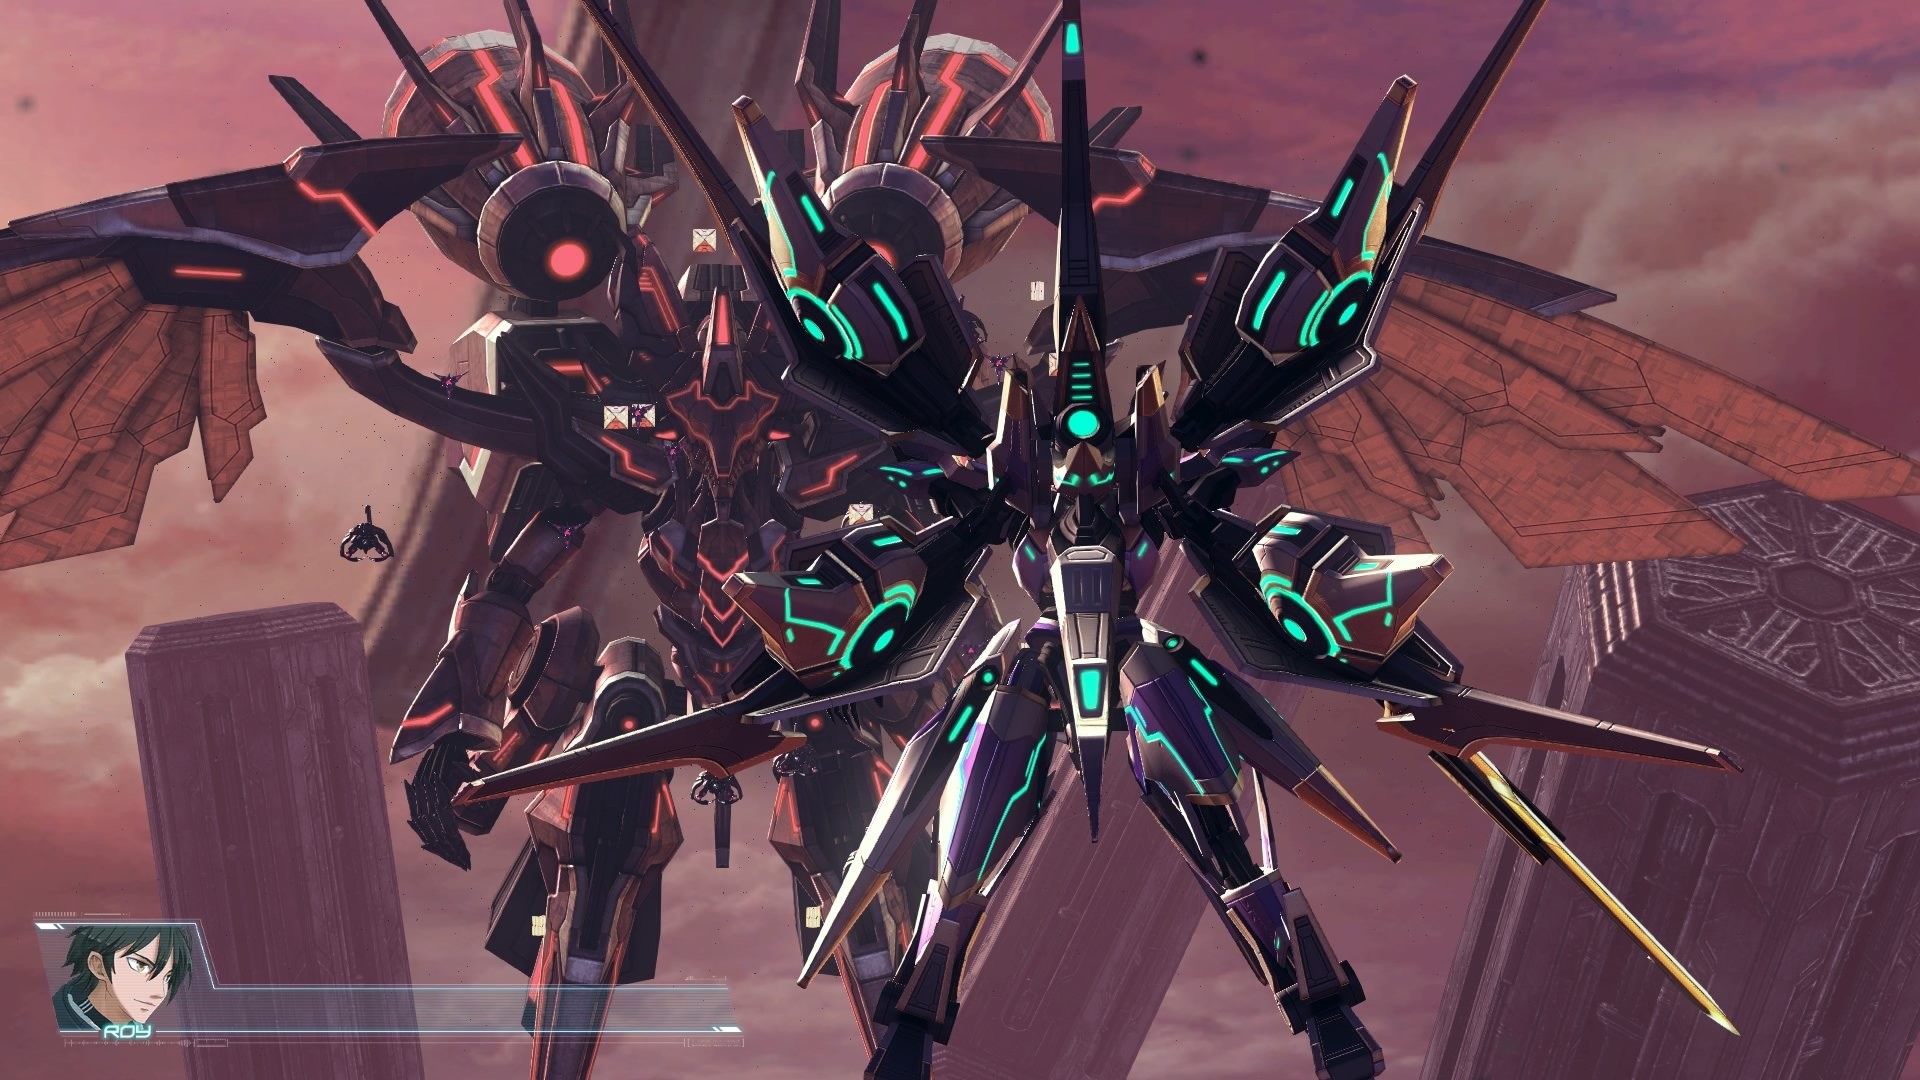 1920x1080 ASTEBREED sci-fi anime shooter fantasy action fighting mecha poster  wallpaper |  | 833272 | WallpaperUP